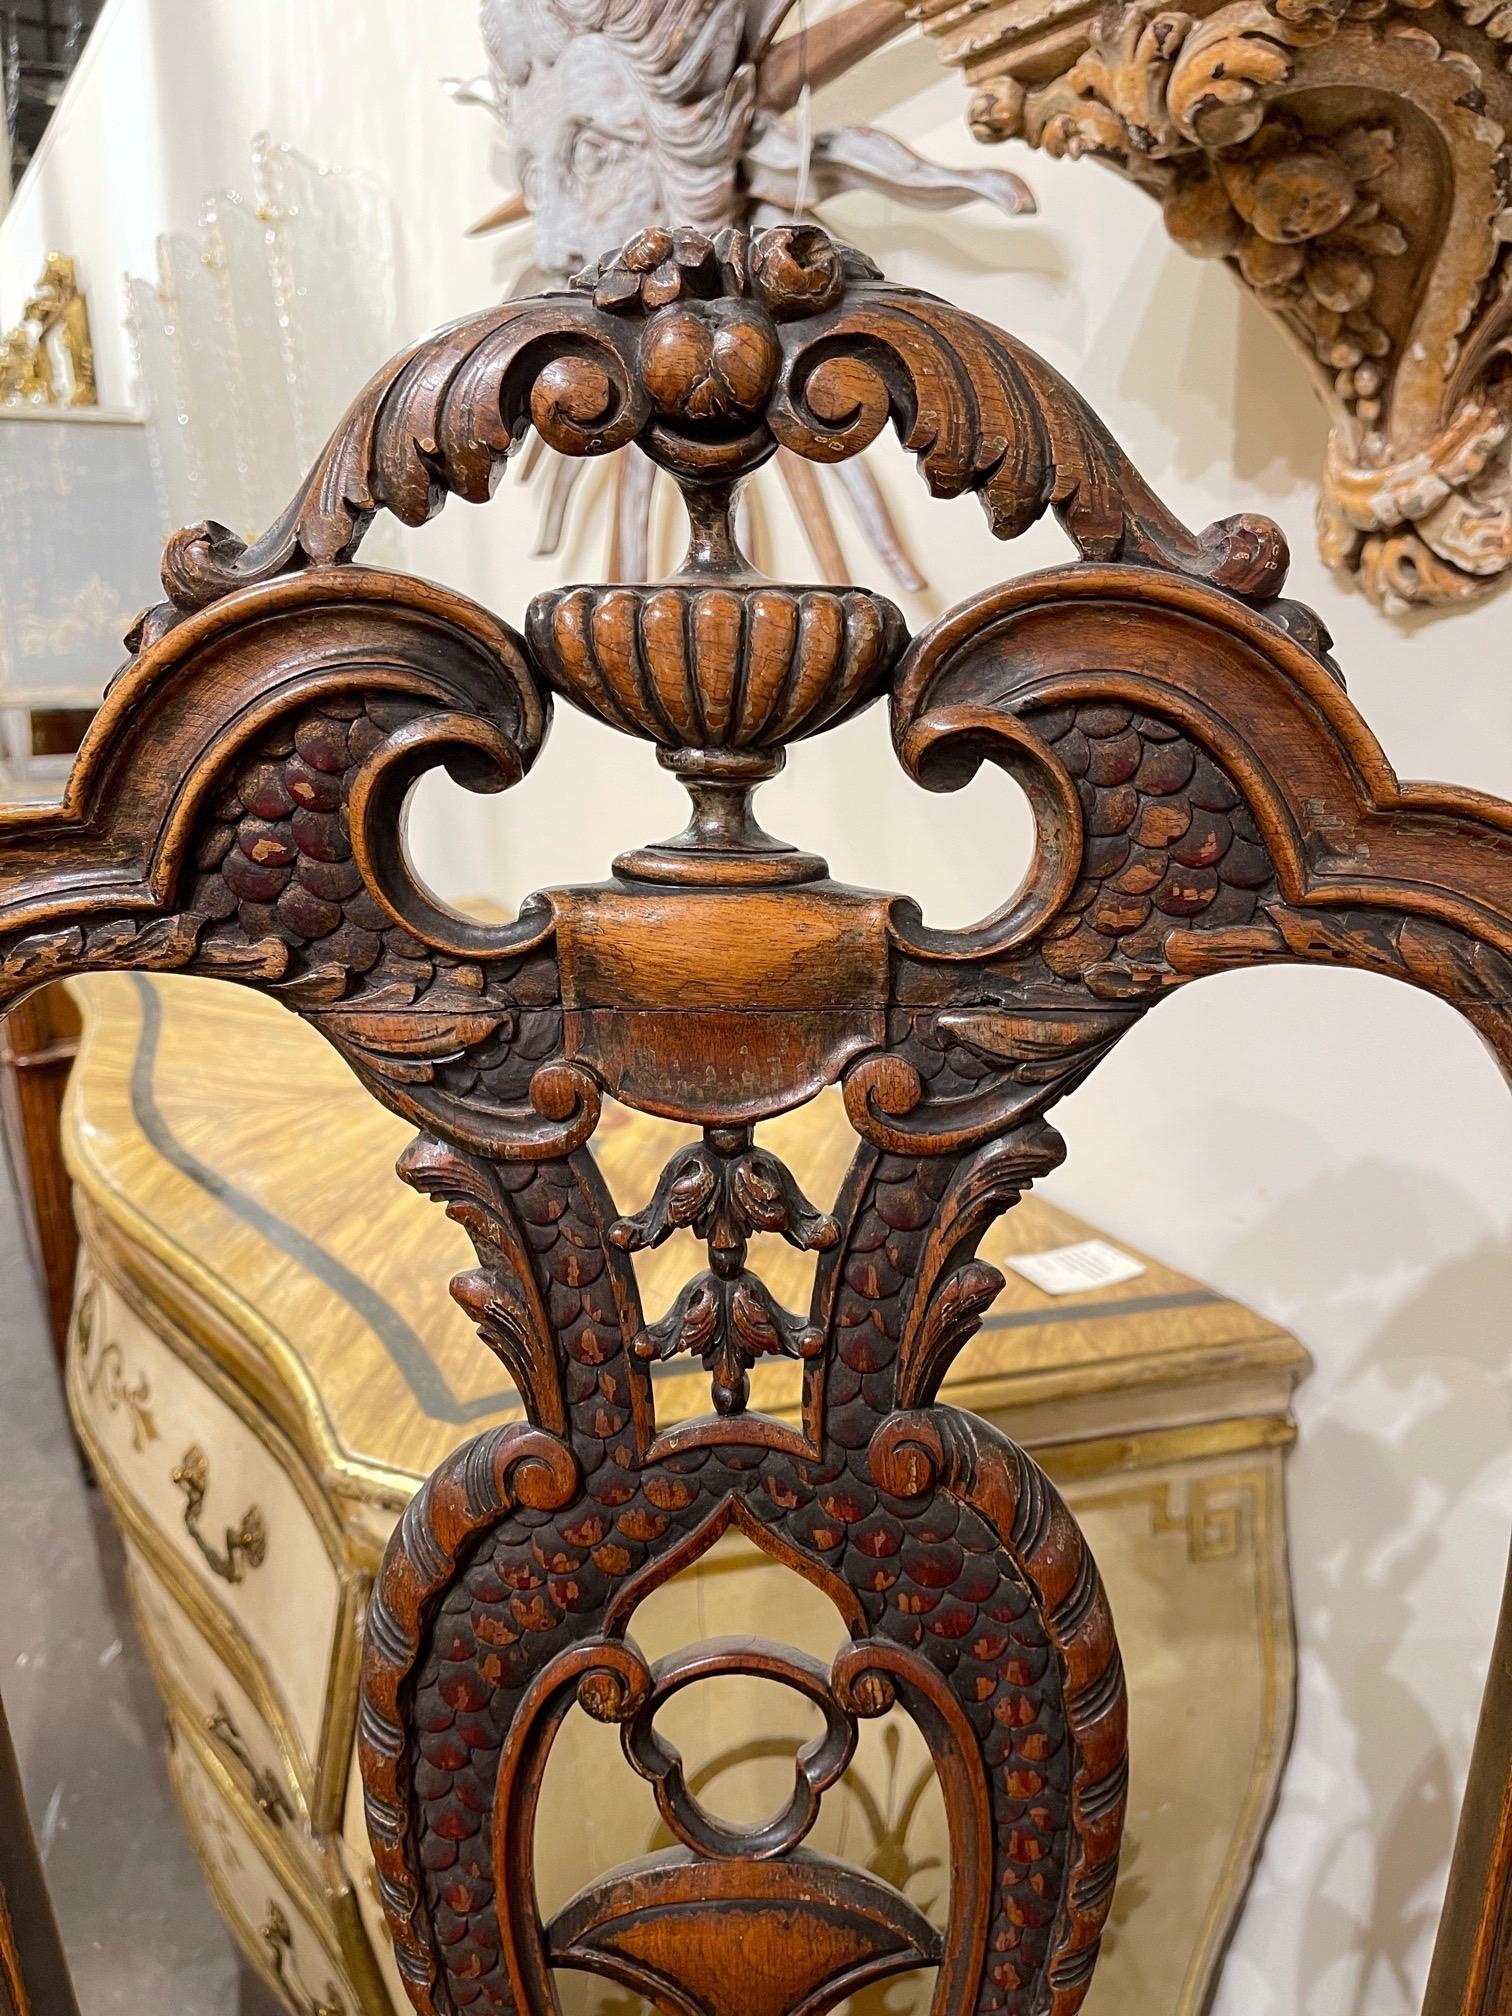 Elegant 19th century English carved oak high back chair. Very fine carvings on this piece. An interesting decorative element!